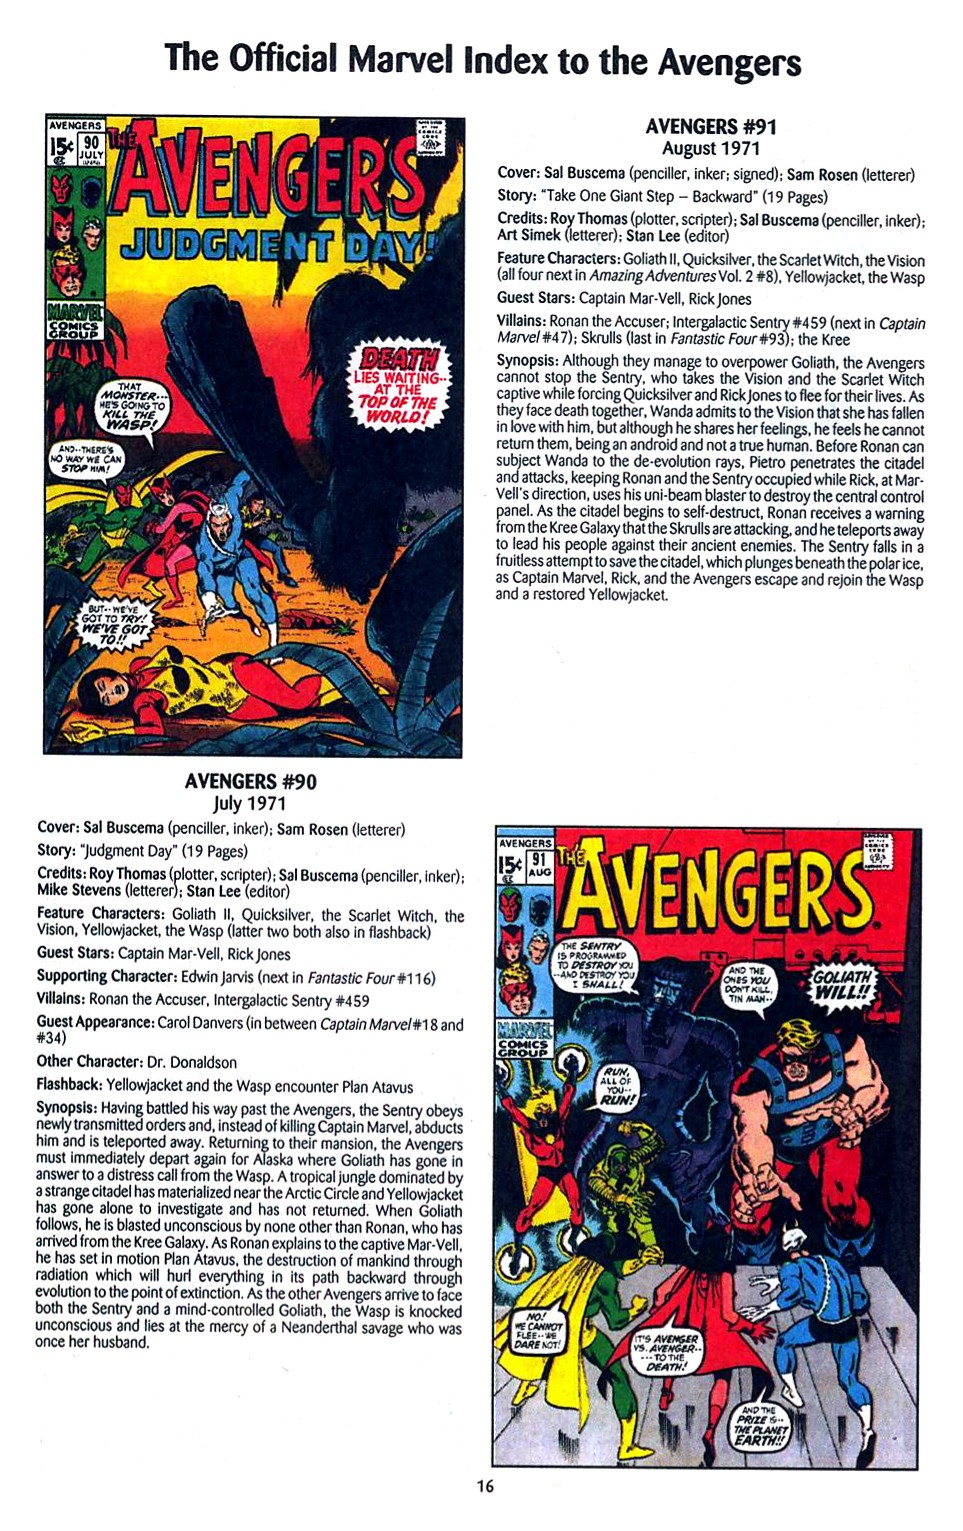 Read online The Official Marvel Index to the Avengers comic -  Issue #2 - 18